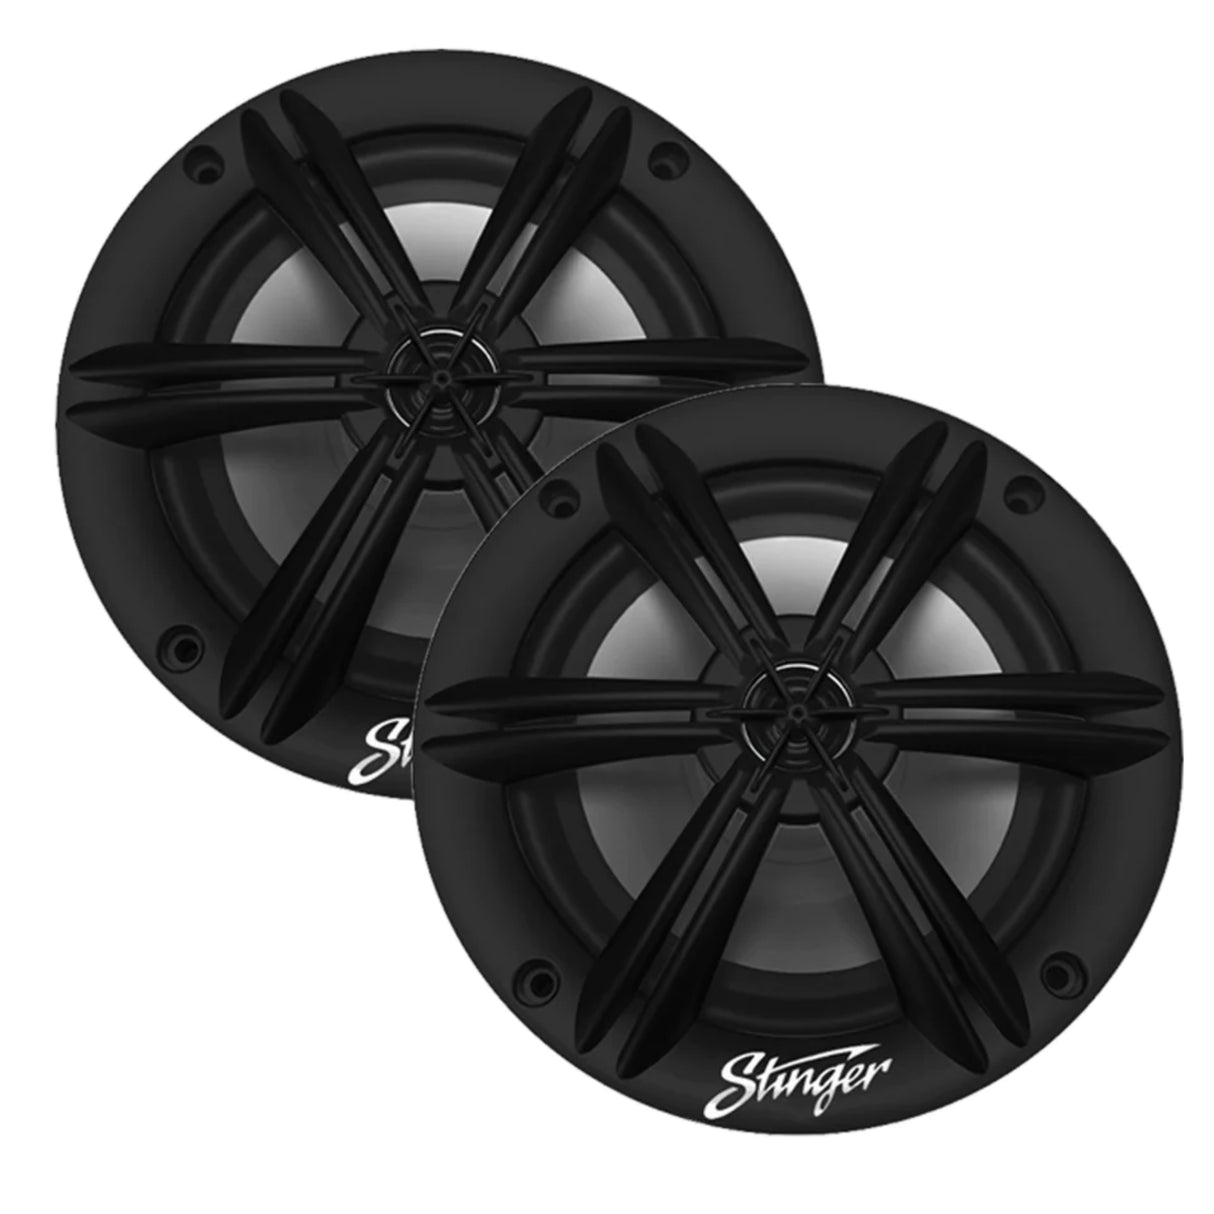 Stinger 6.5" Black Coaxial Speakers With Built-In Multi-Color Rgb Lighting - PROTEUS MARINE STORE